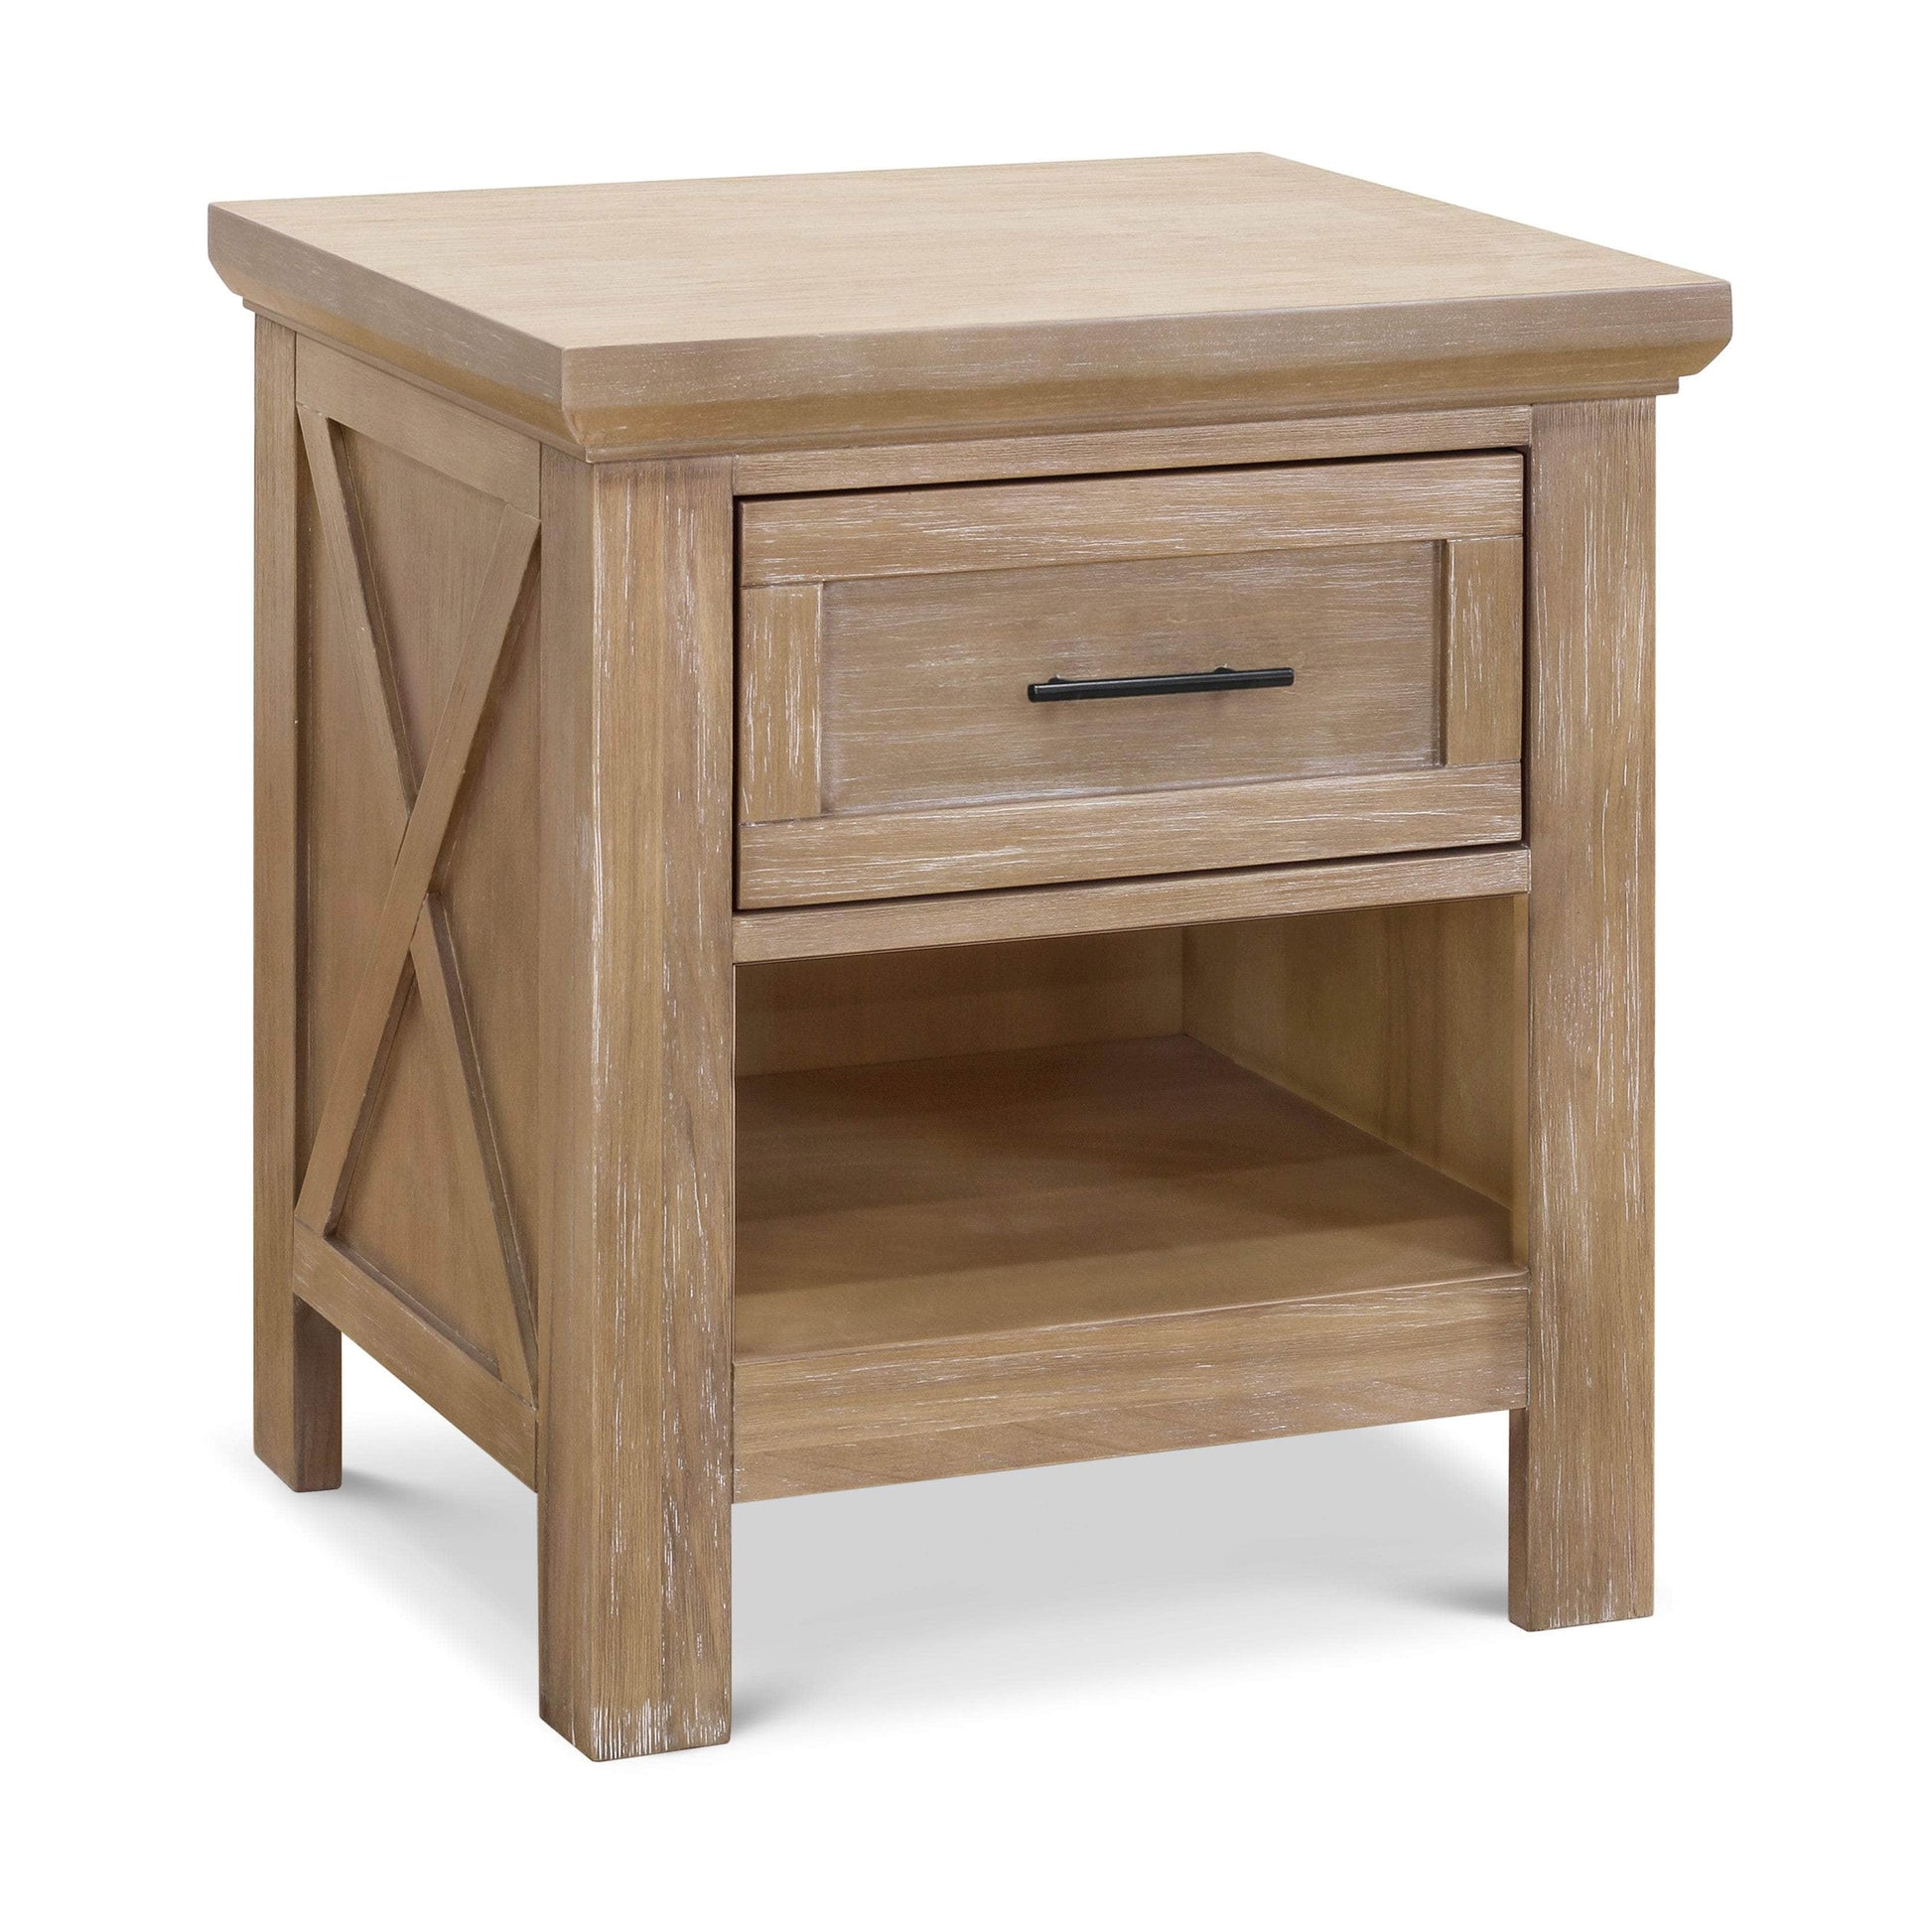 B14560DF,Emory Farmhouse Nightstand in Driftwood Finish